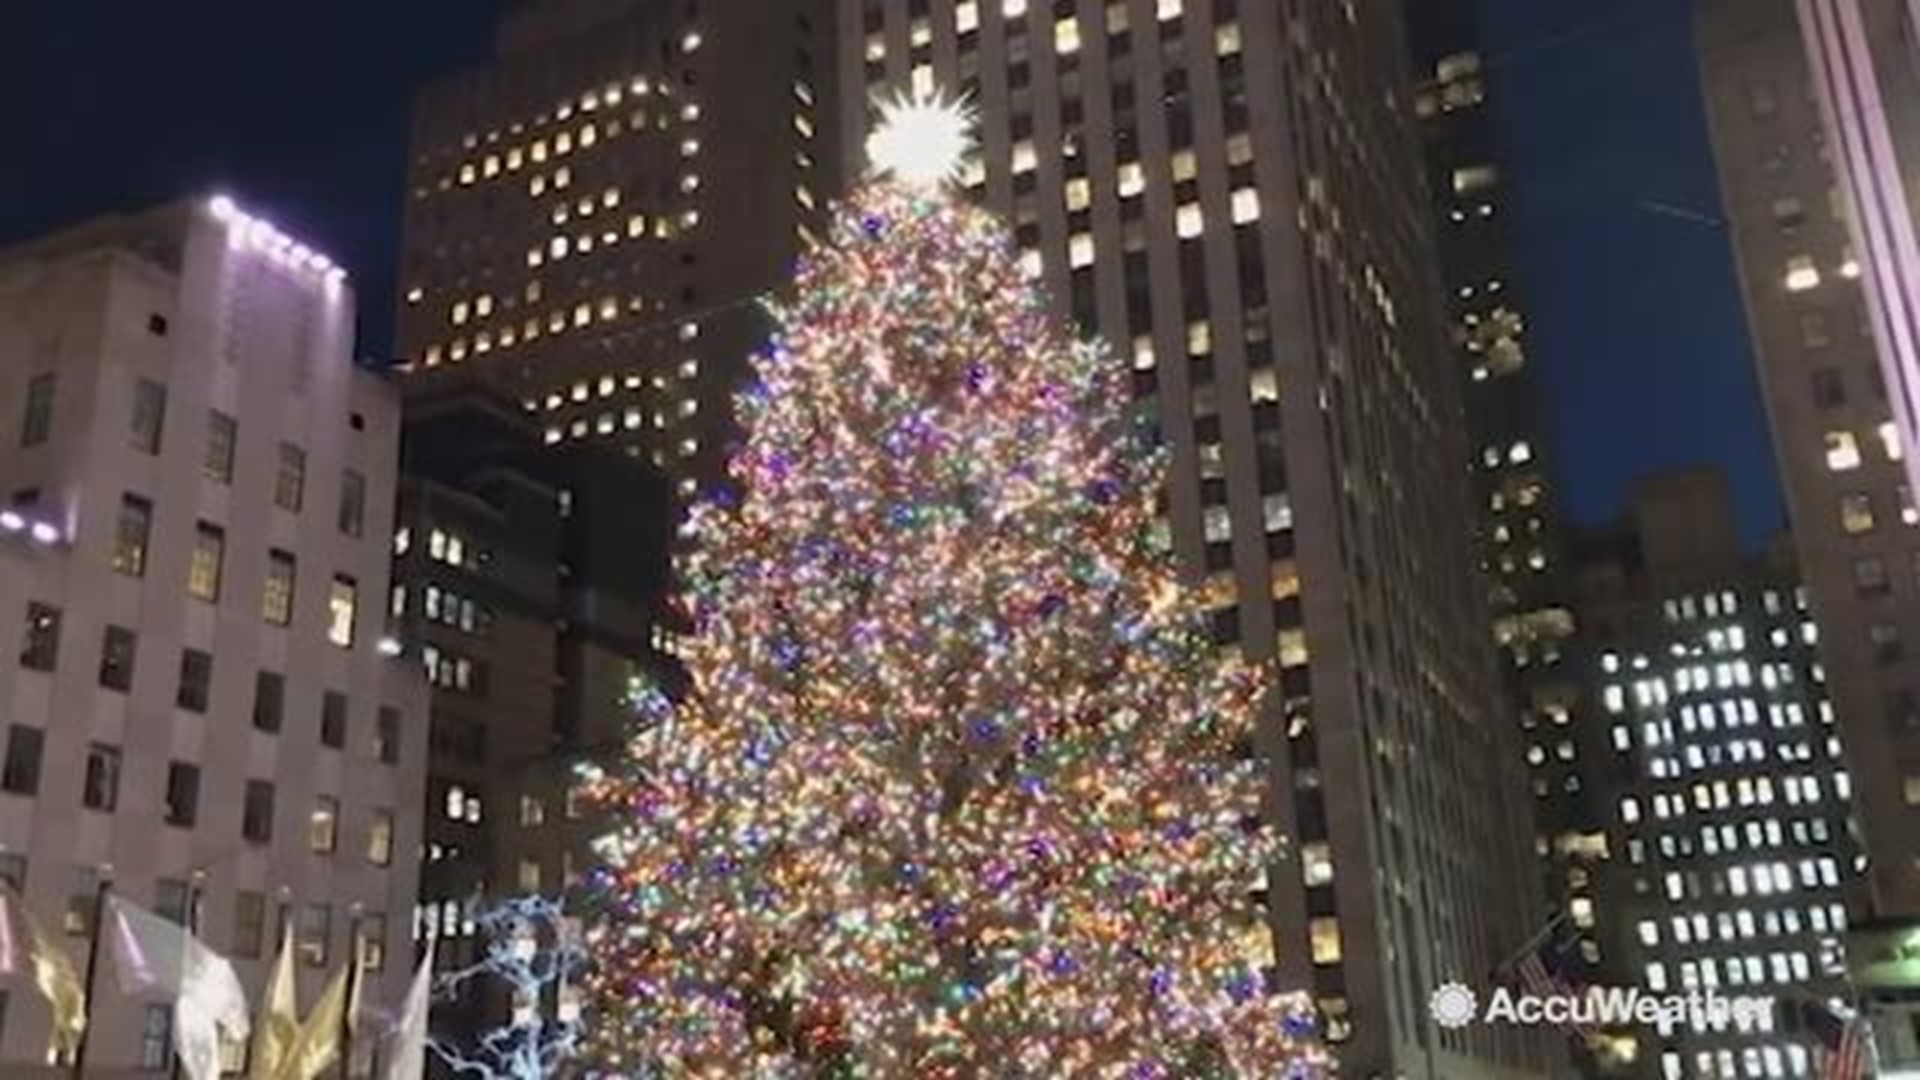 It's beauty and dazzling 50 thousand lights, draws hundreds of thousand of visitors each day. The tree will be on display through January 7th, but once the holiday season is over, the tree's job is not done. Find out where it will go to next.